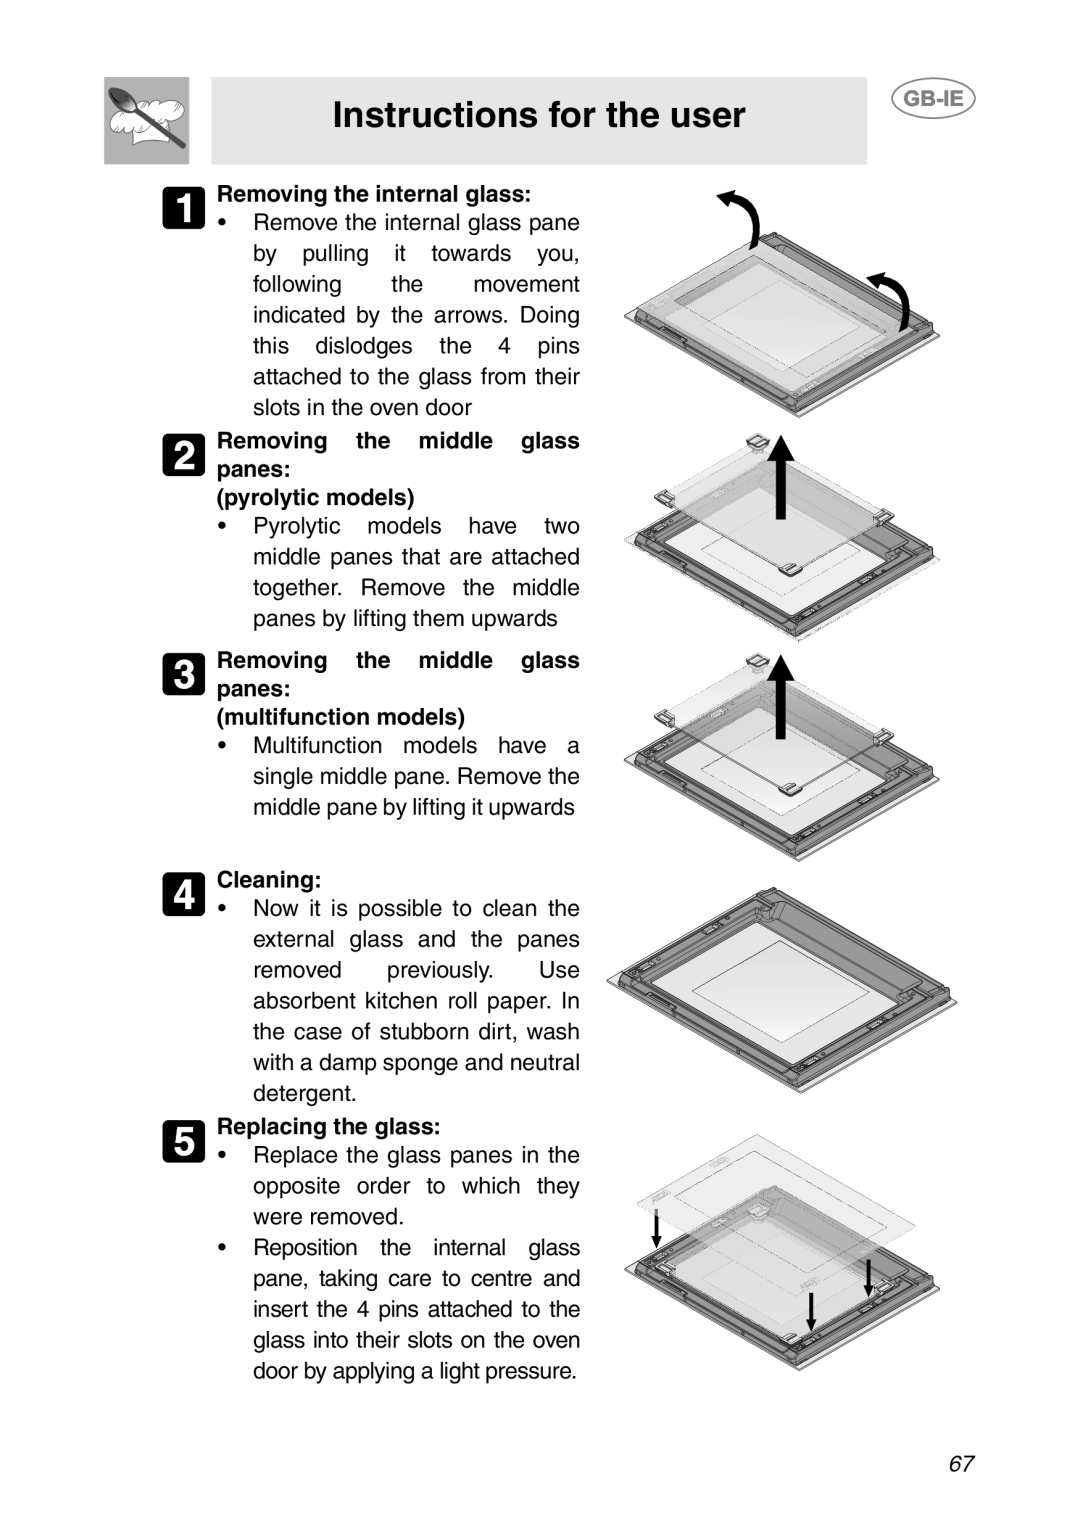 Smeg SCP111-2 Instructions for the user, Removing the internal glass, Removing the middle glass panes pyrolytic models 